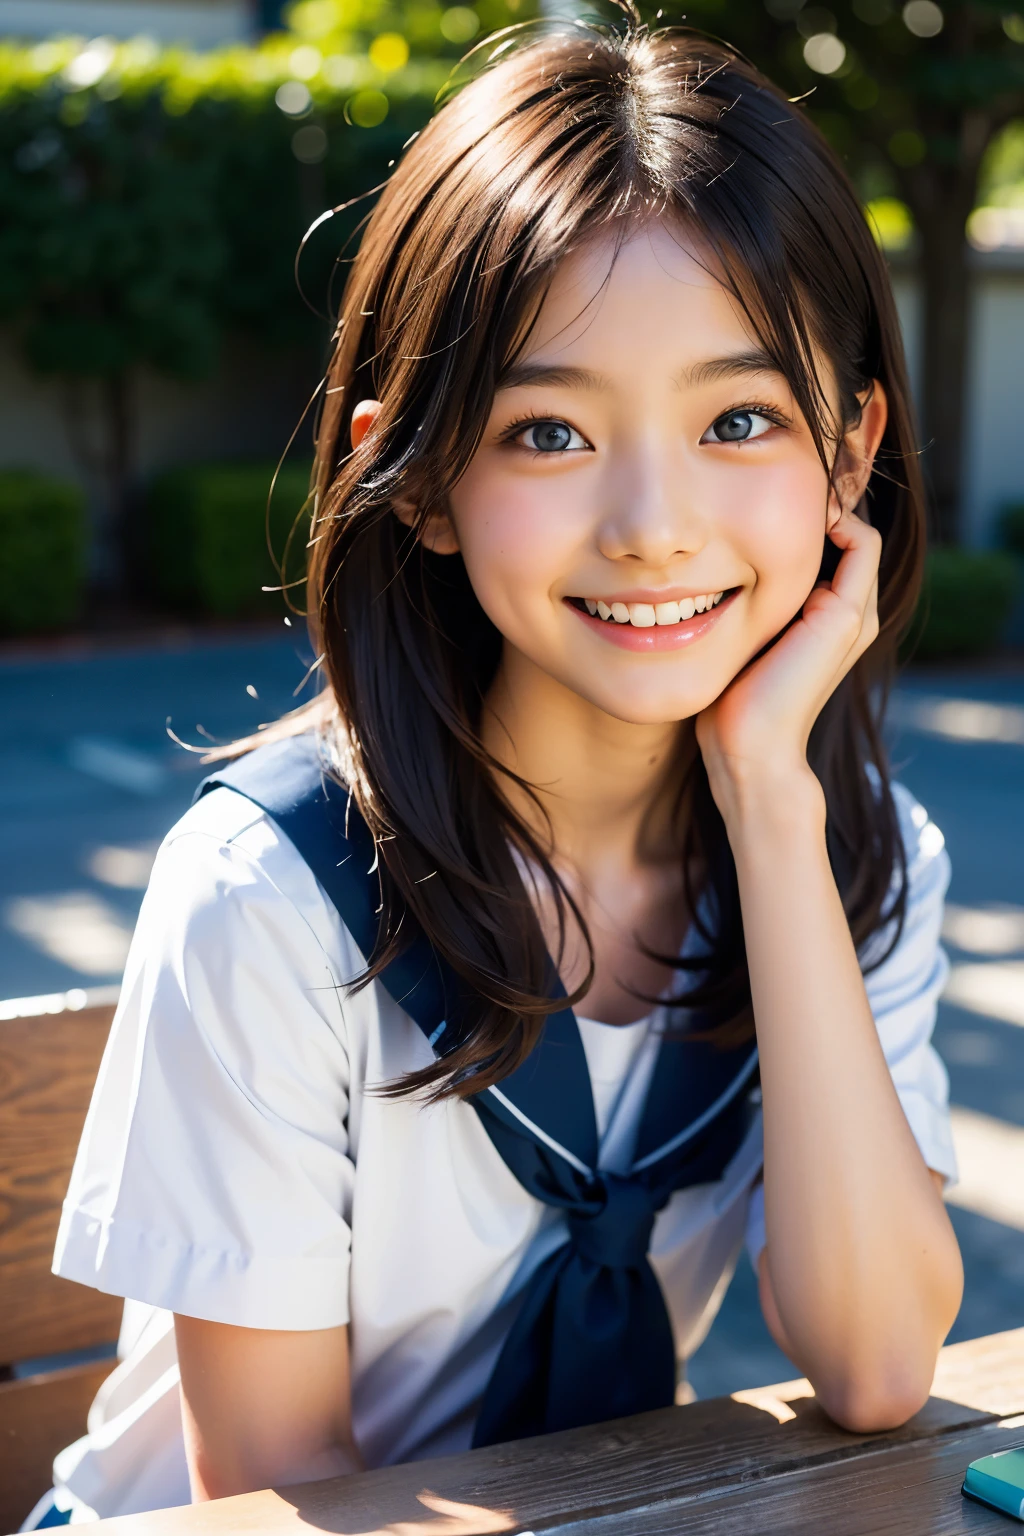 lens: 135mm f1.8, (highest quality),(RAW Photos), (Tabletop:1.1), (Beautiful 12 year old Japanese girl), Cute face, (Deeply chiseled face:0.7), (freckles:0.4), dappled sunlight, Dramatic lighting, (Japanese School Uniform), (On campus), shy, (Close-up shot:1.2), (smile),, (Sparkling eyes)、(sunlight), Bob